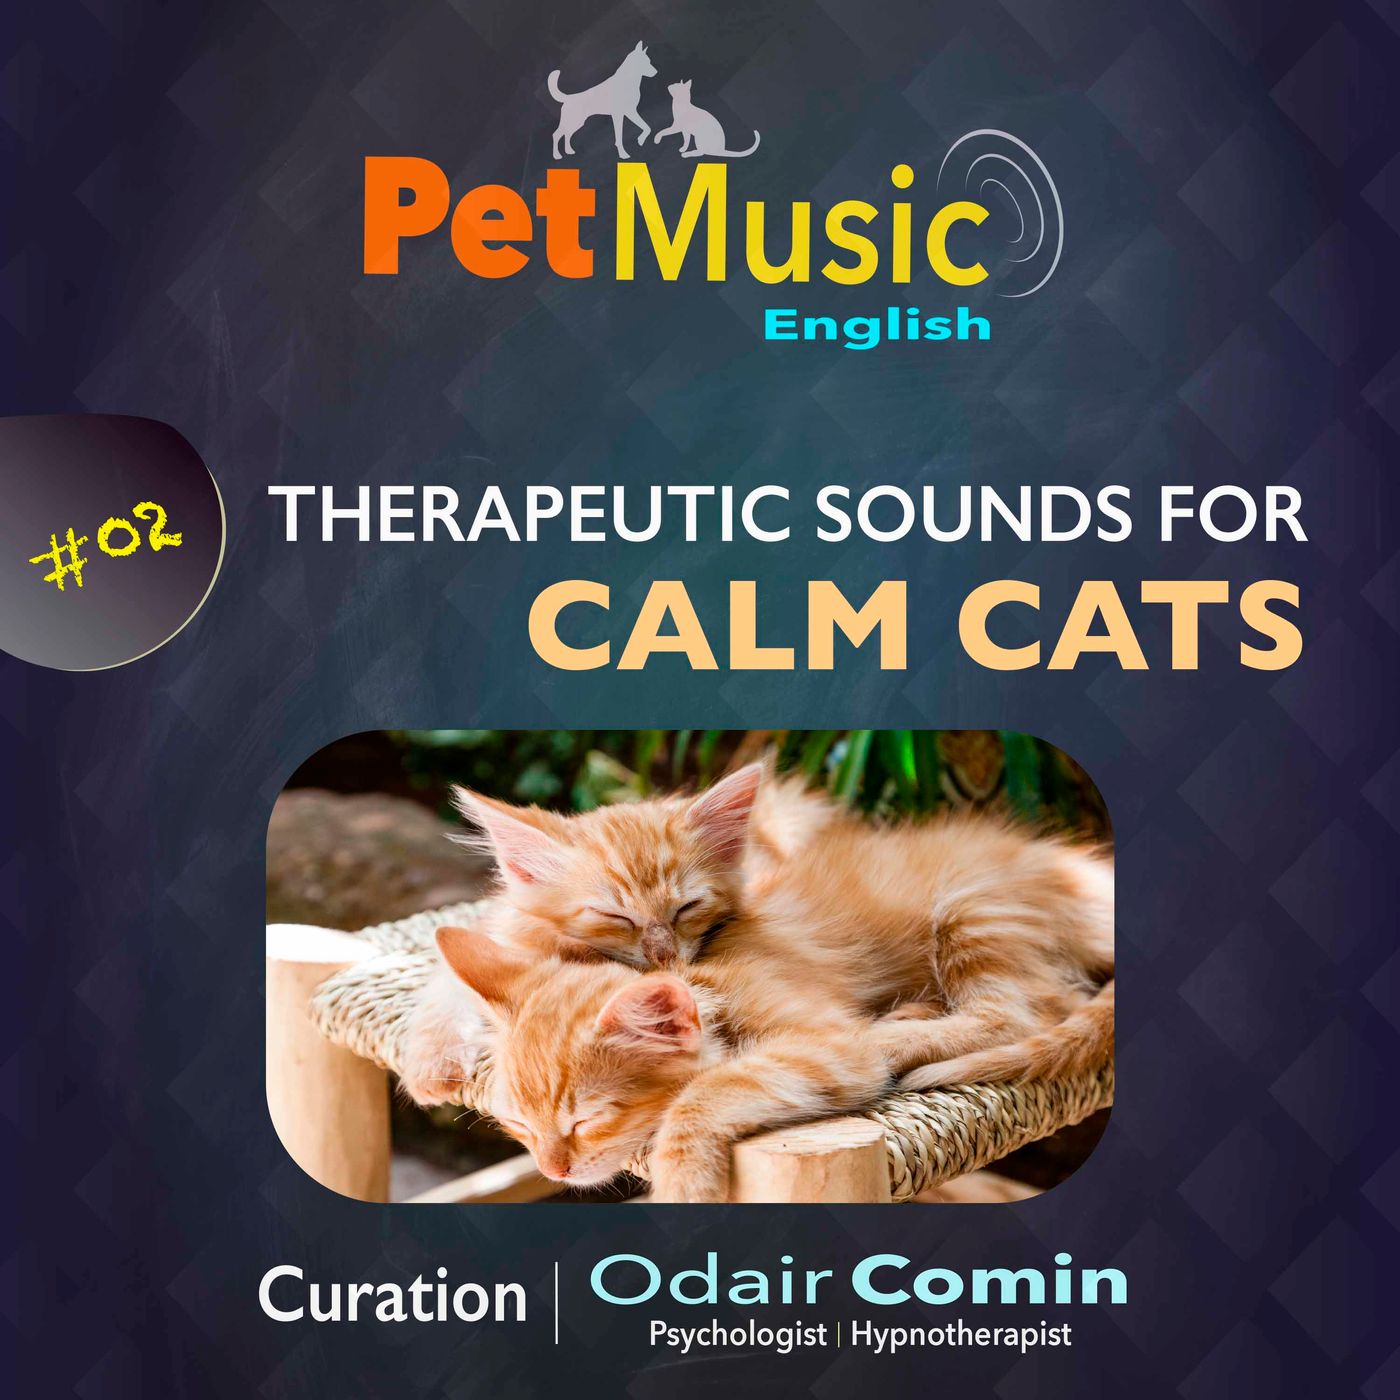 #02 Therapeutic Sounds for Calm Cats | PetMusic